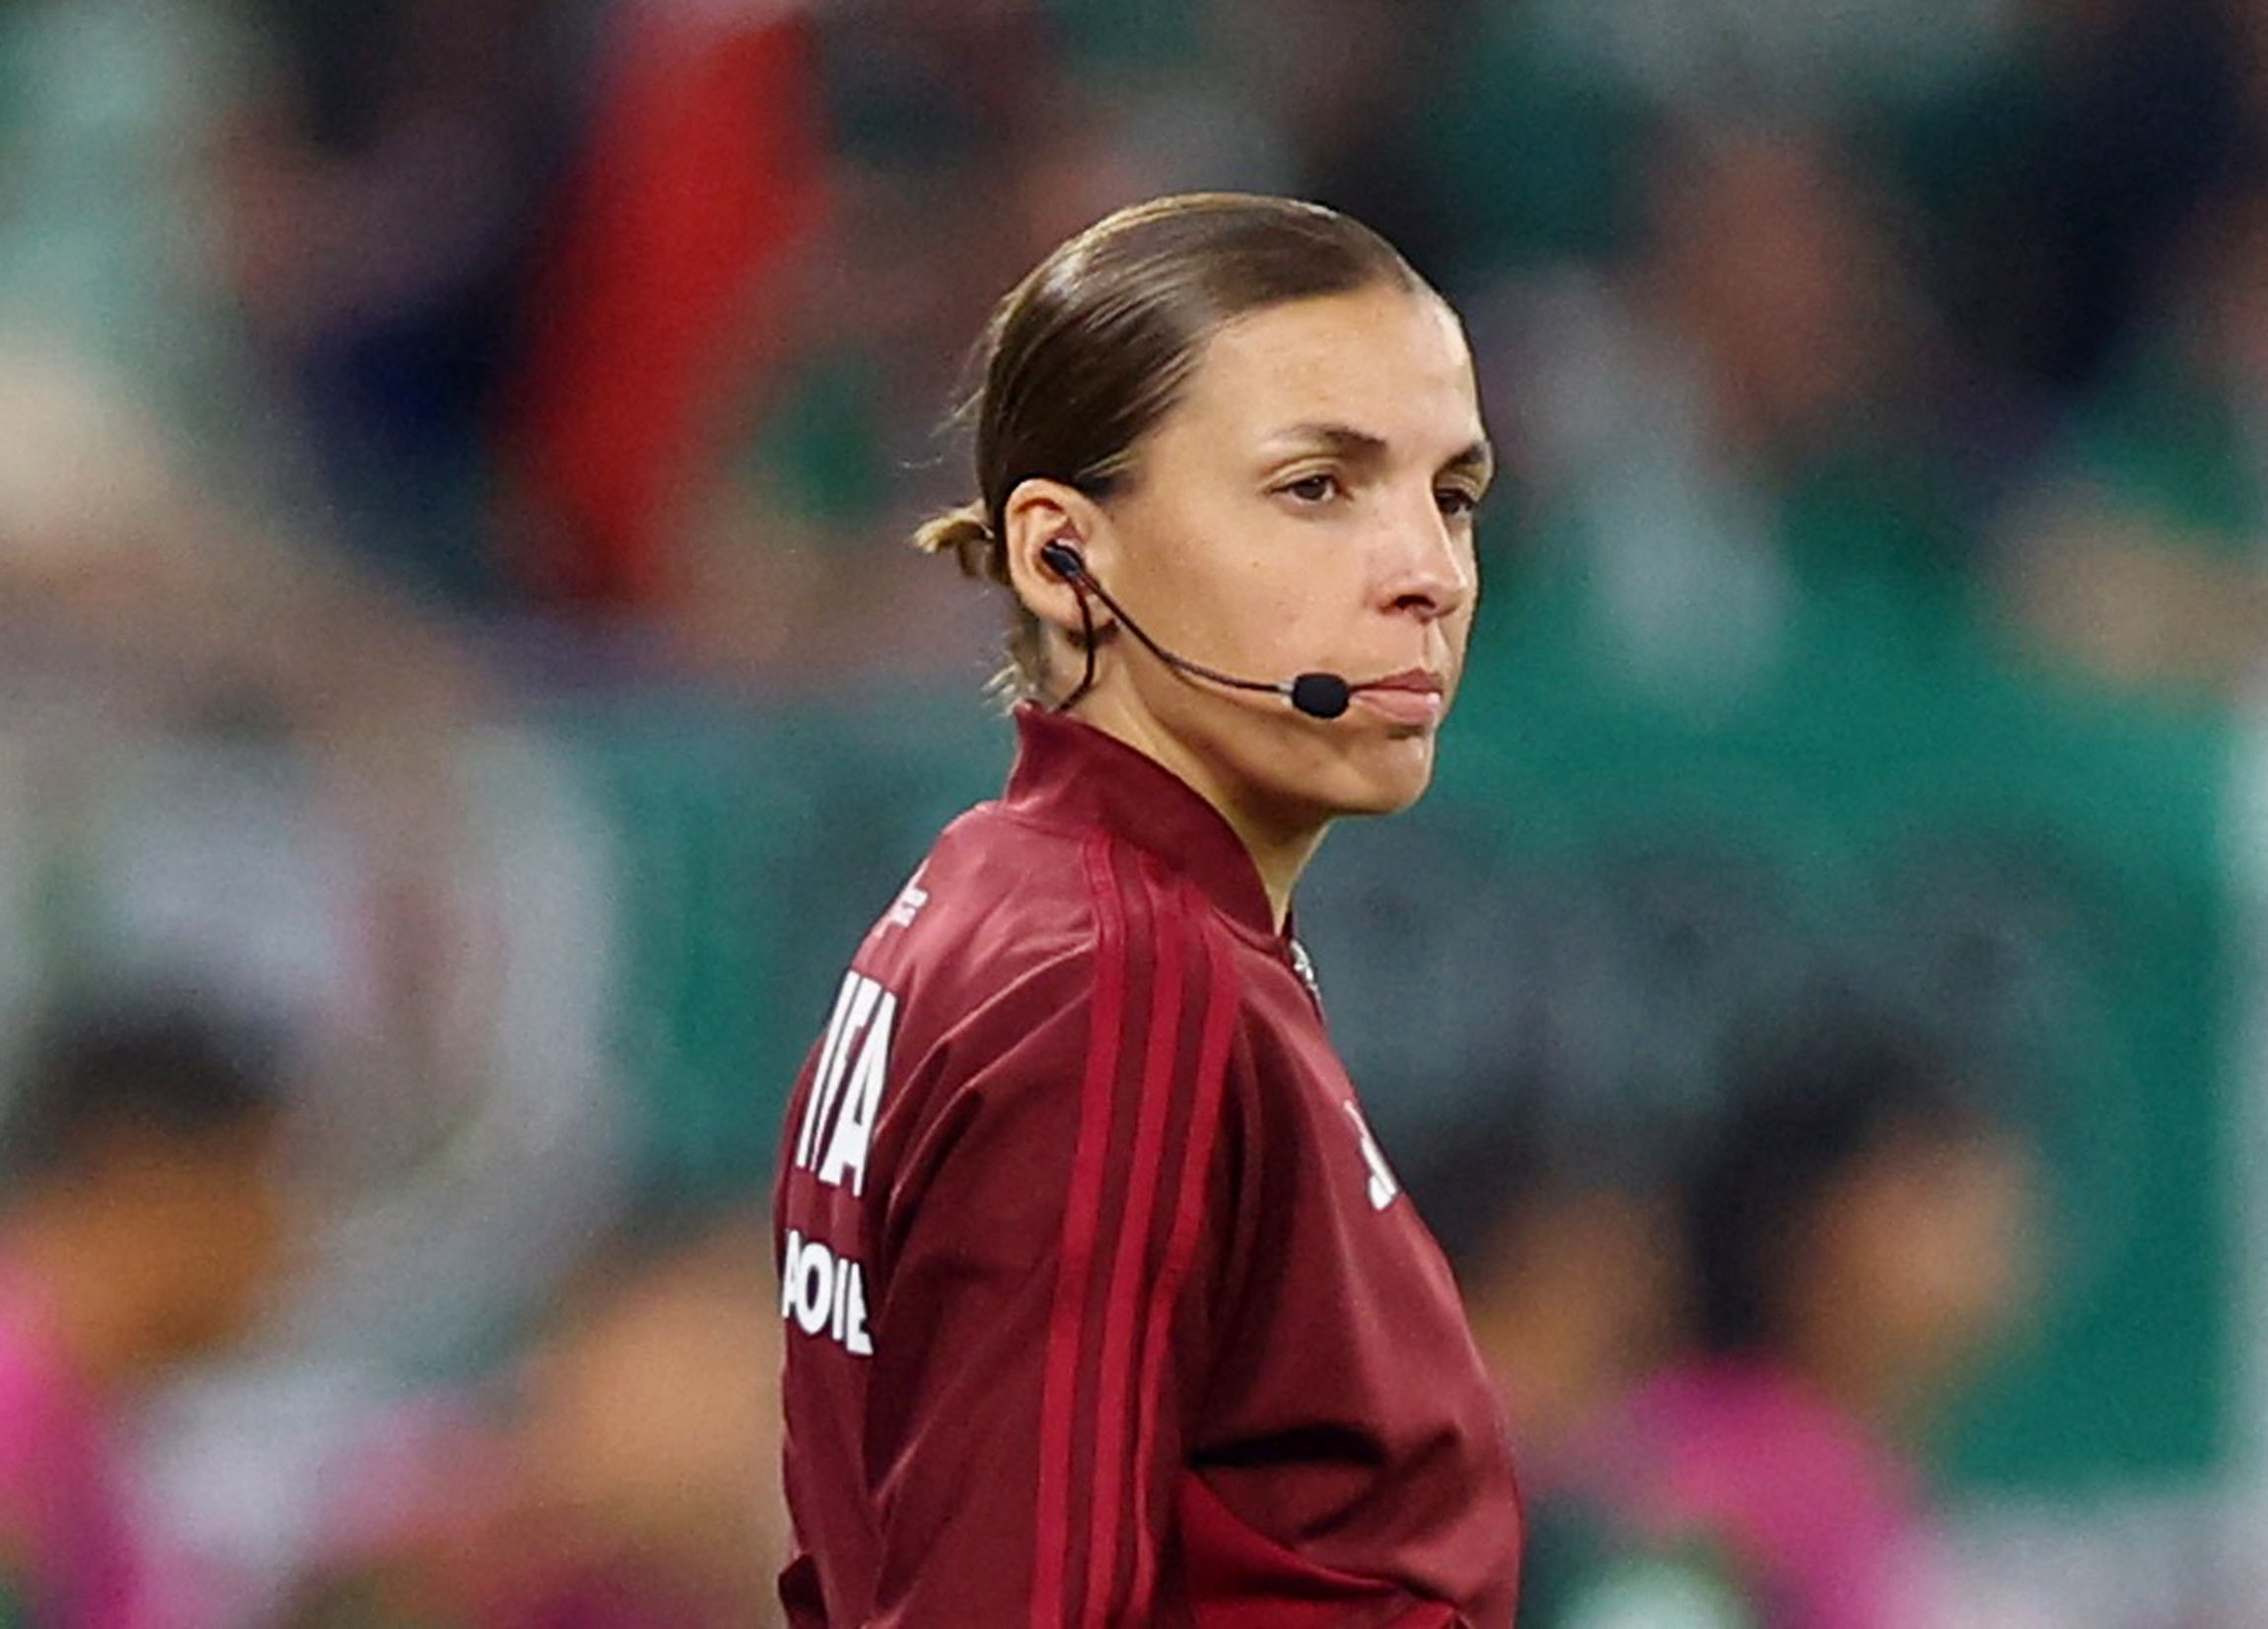 Stephanie Frappart makes history as first female referee for match